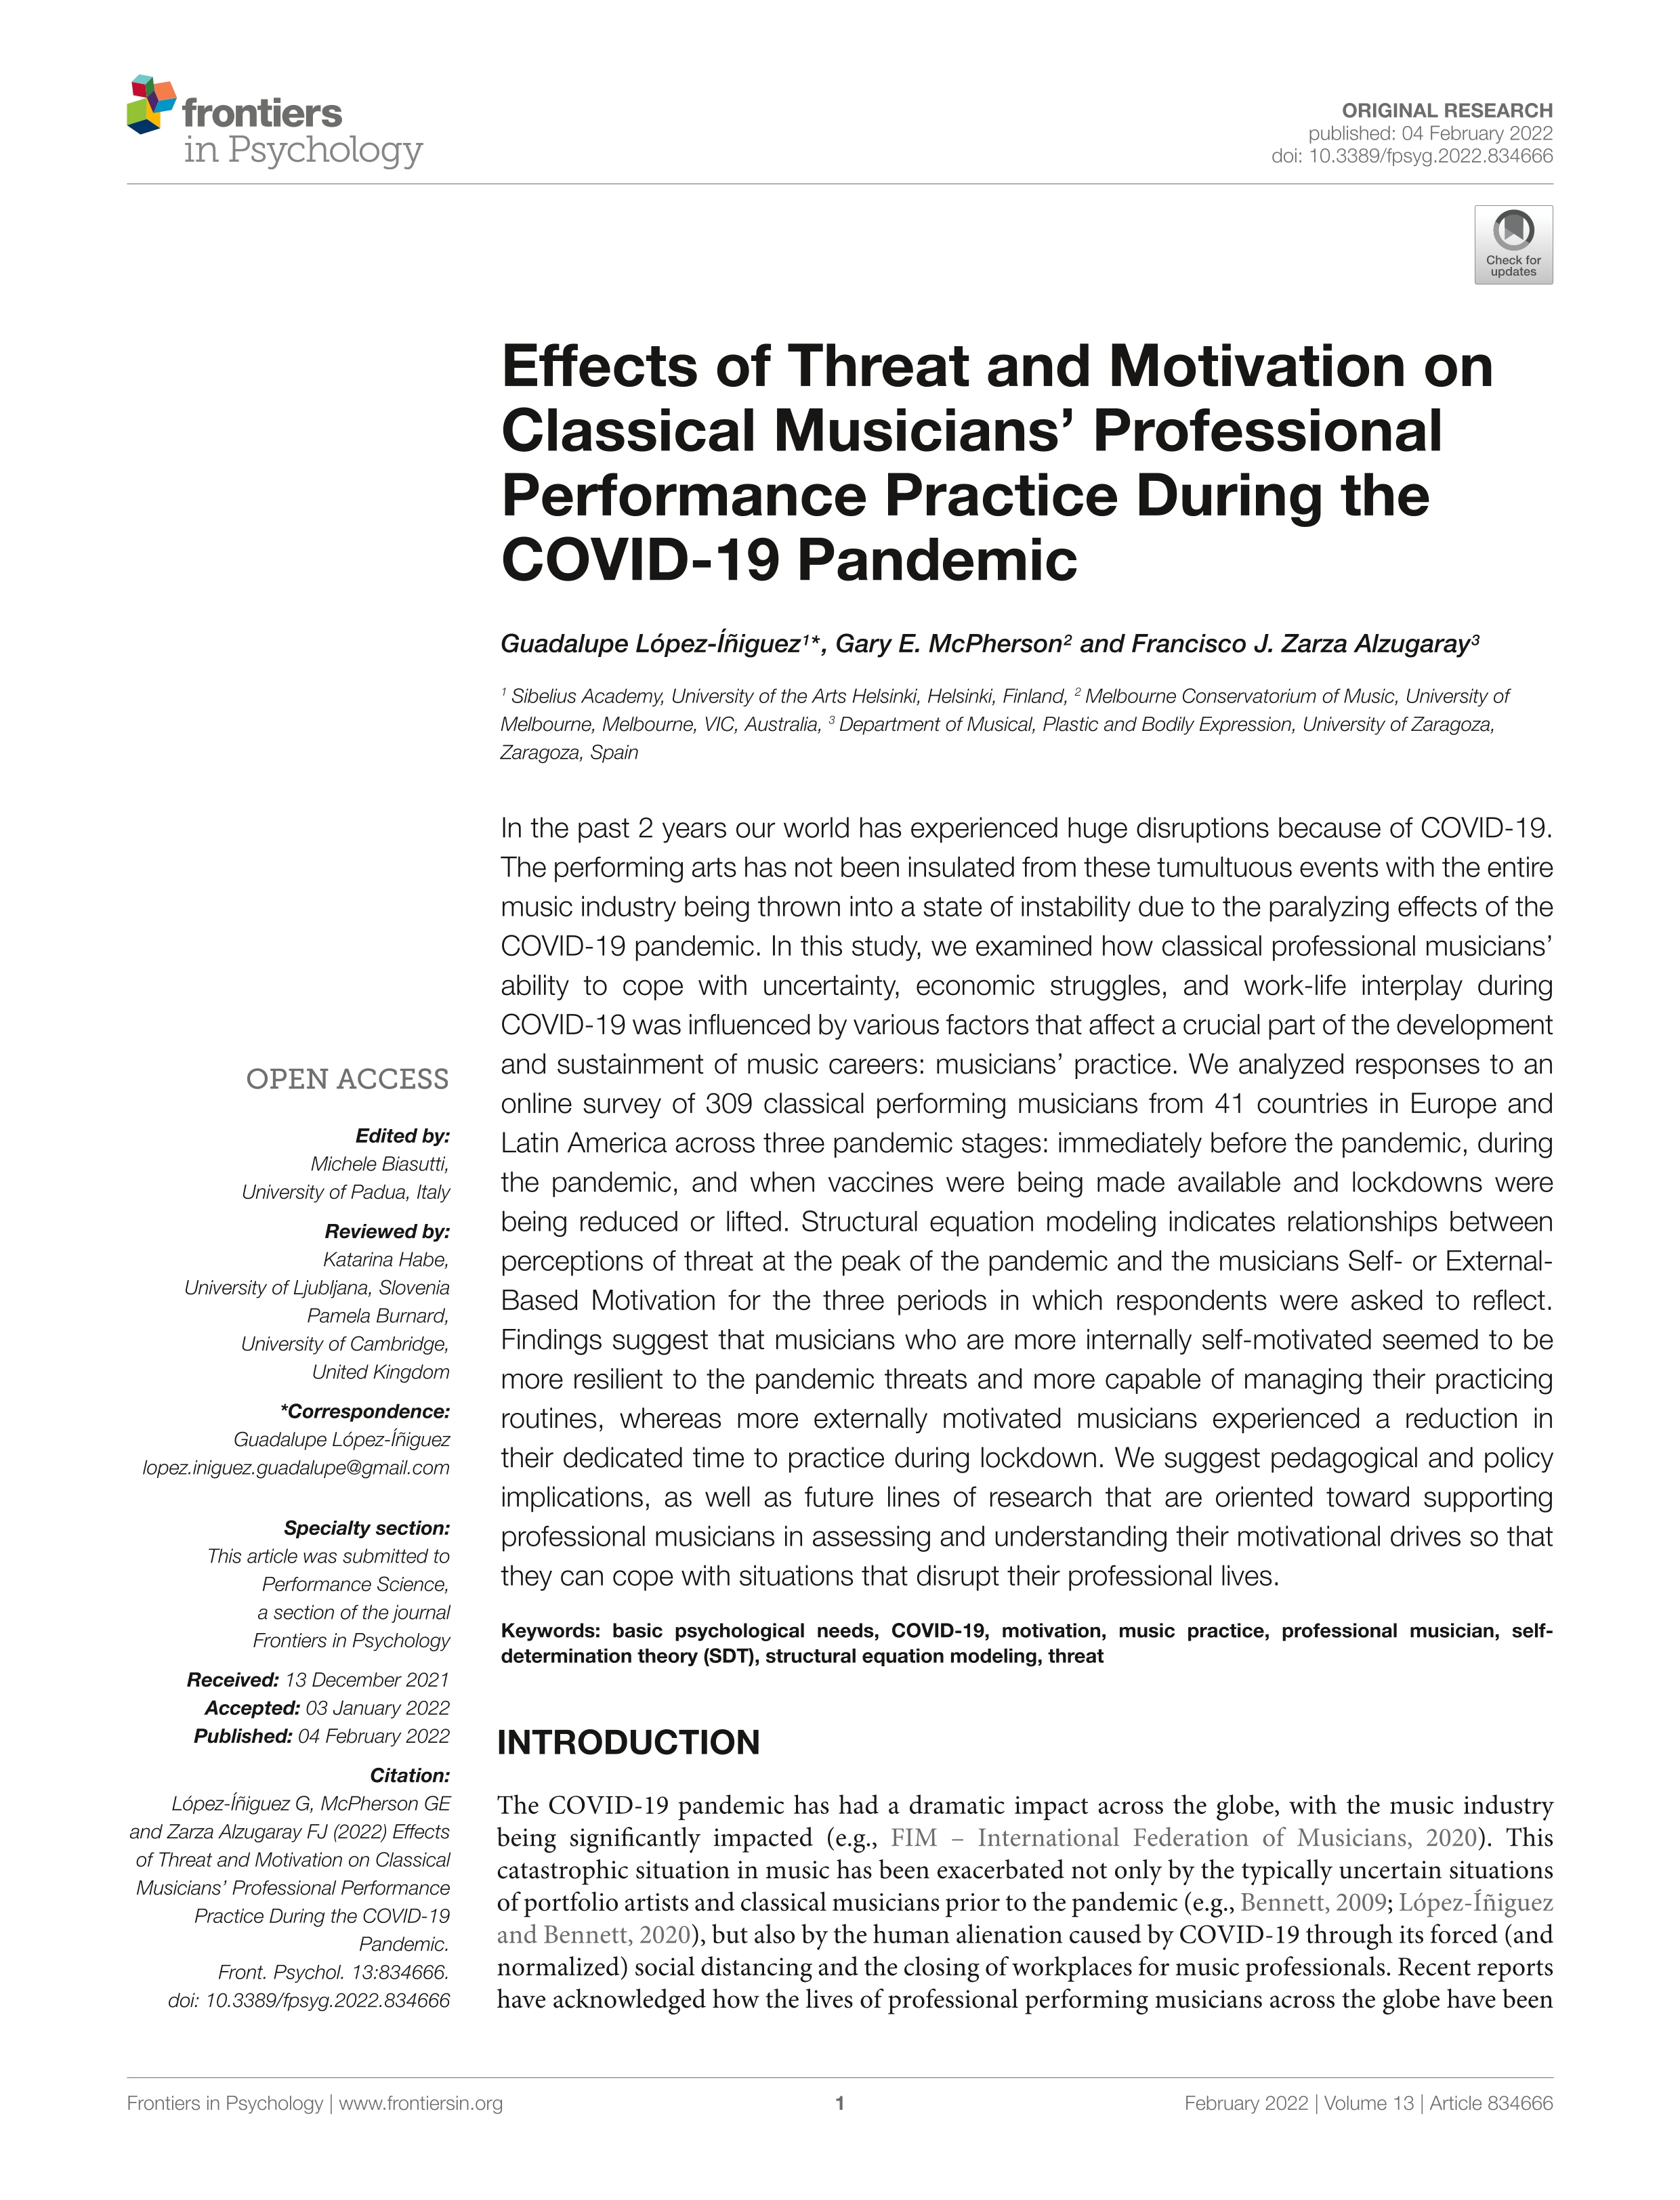 Effects of threat and motivation on classical musicians’ professional performance practice during the Covid-19 pandemic